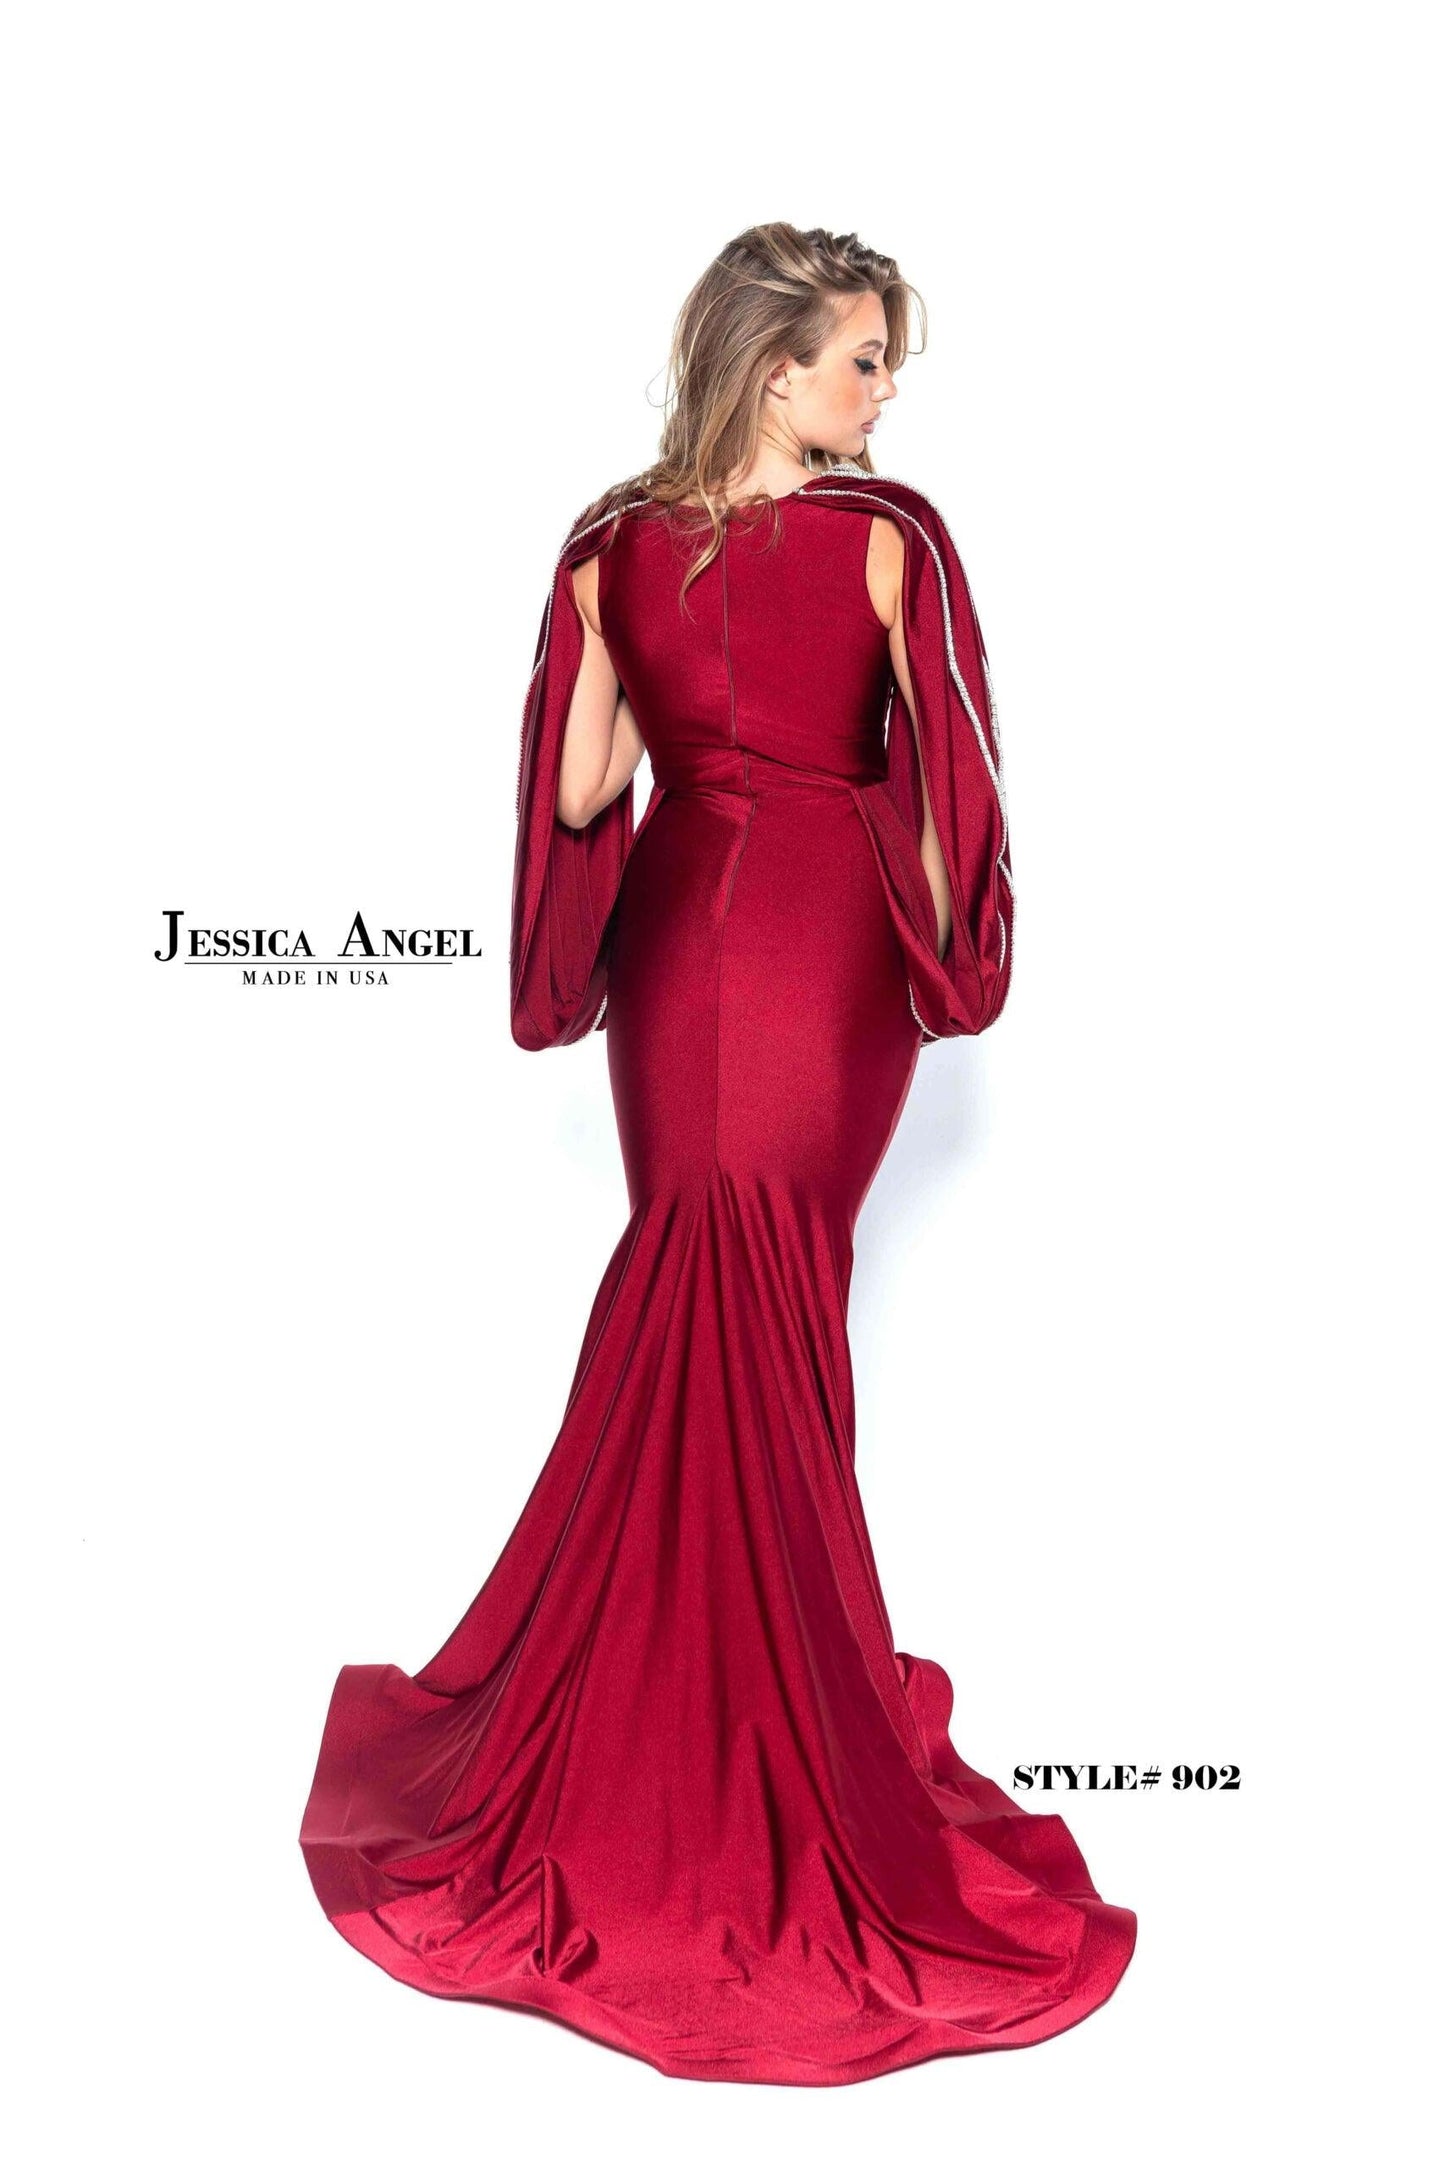 Jessica Angel Long Formal Fitted Evening Dress 902 - The Dress Outlet